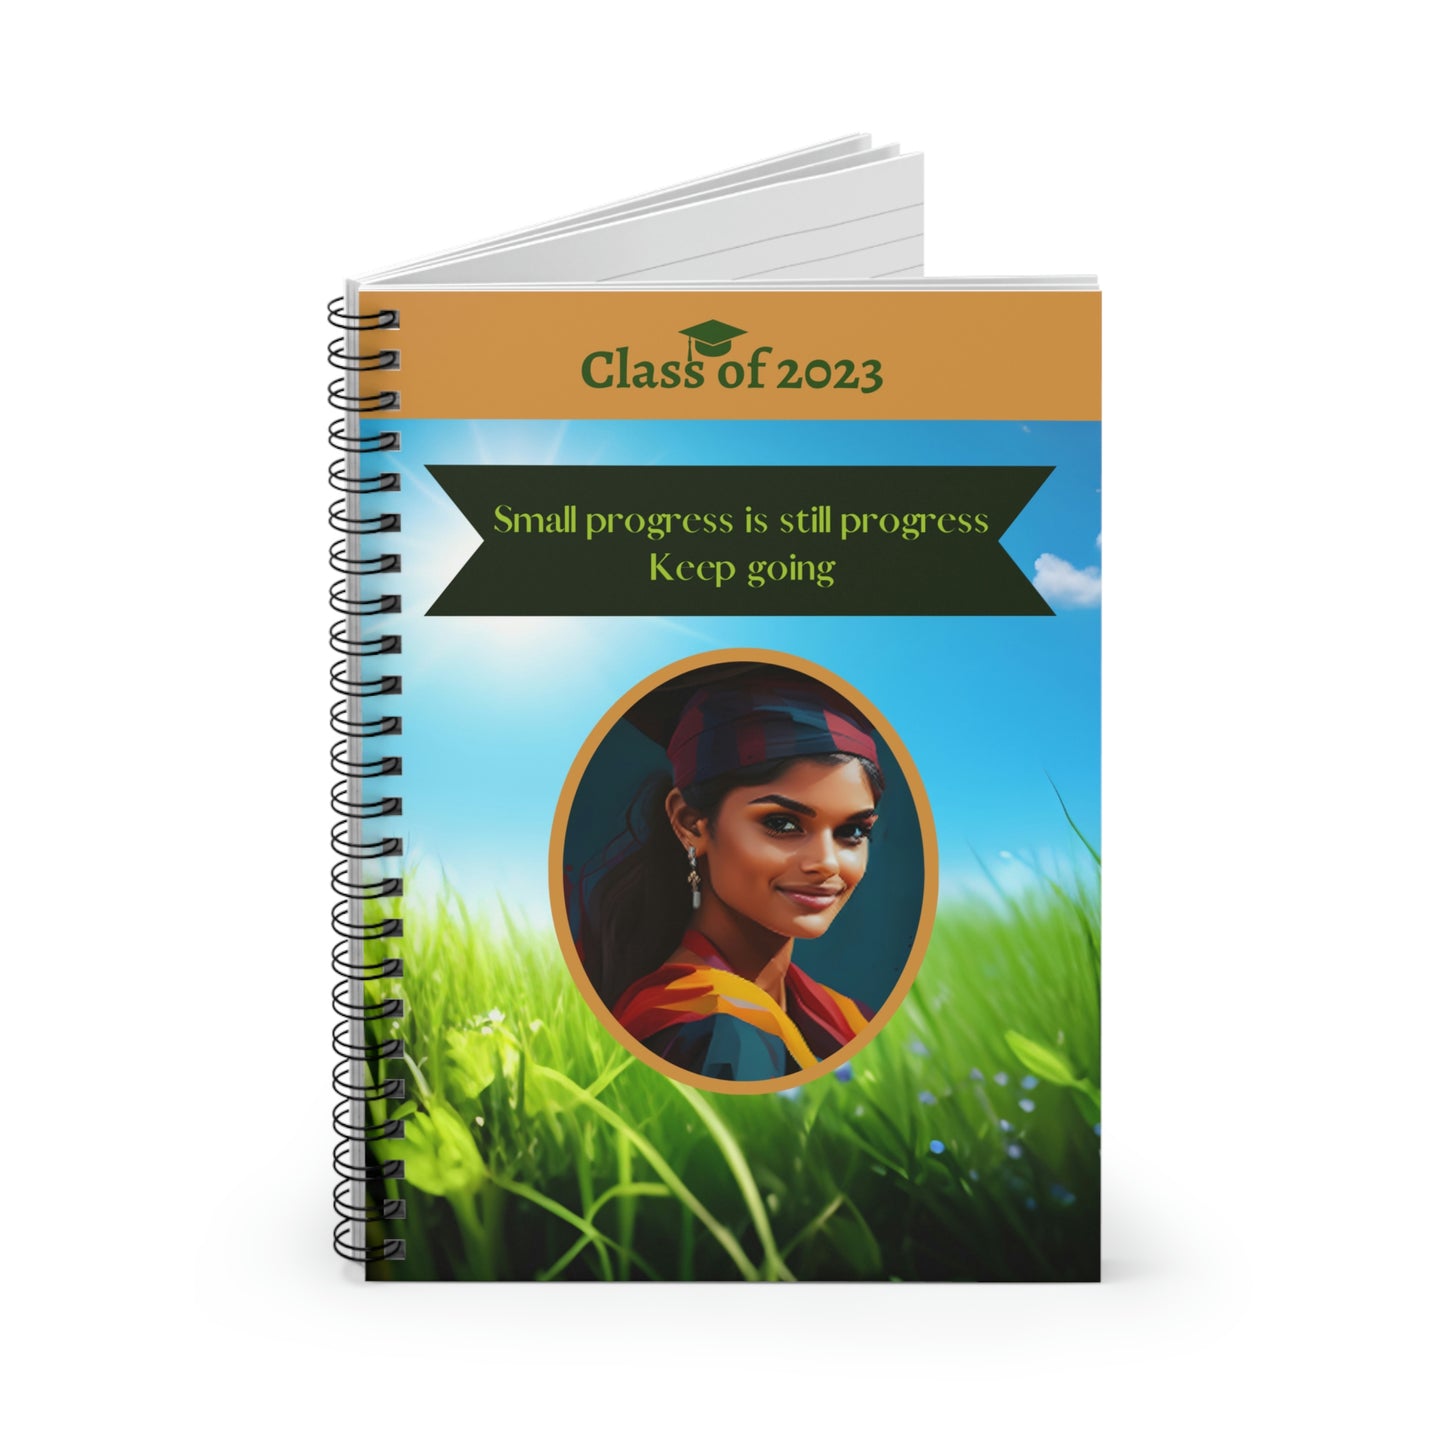 Class of 2023 Graduate Journal - (Indian Young Lady 2) - Ruled Line